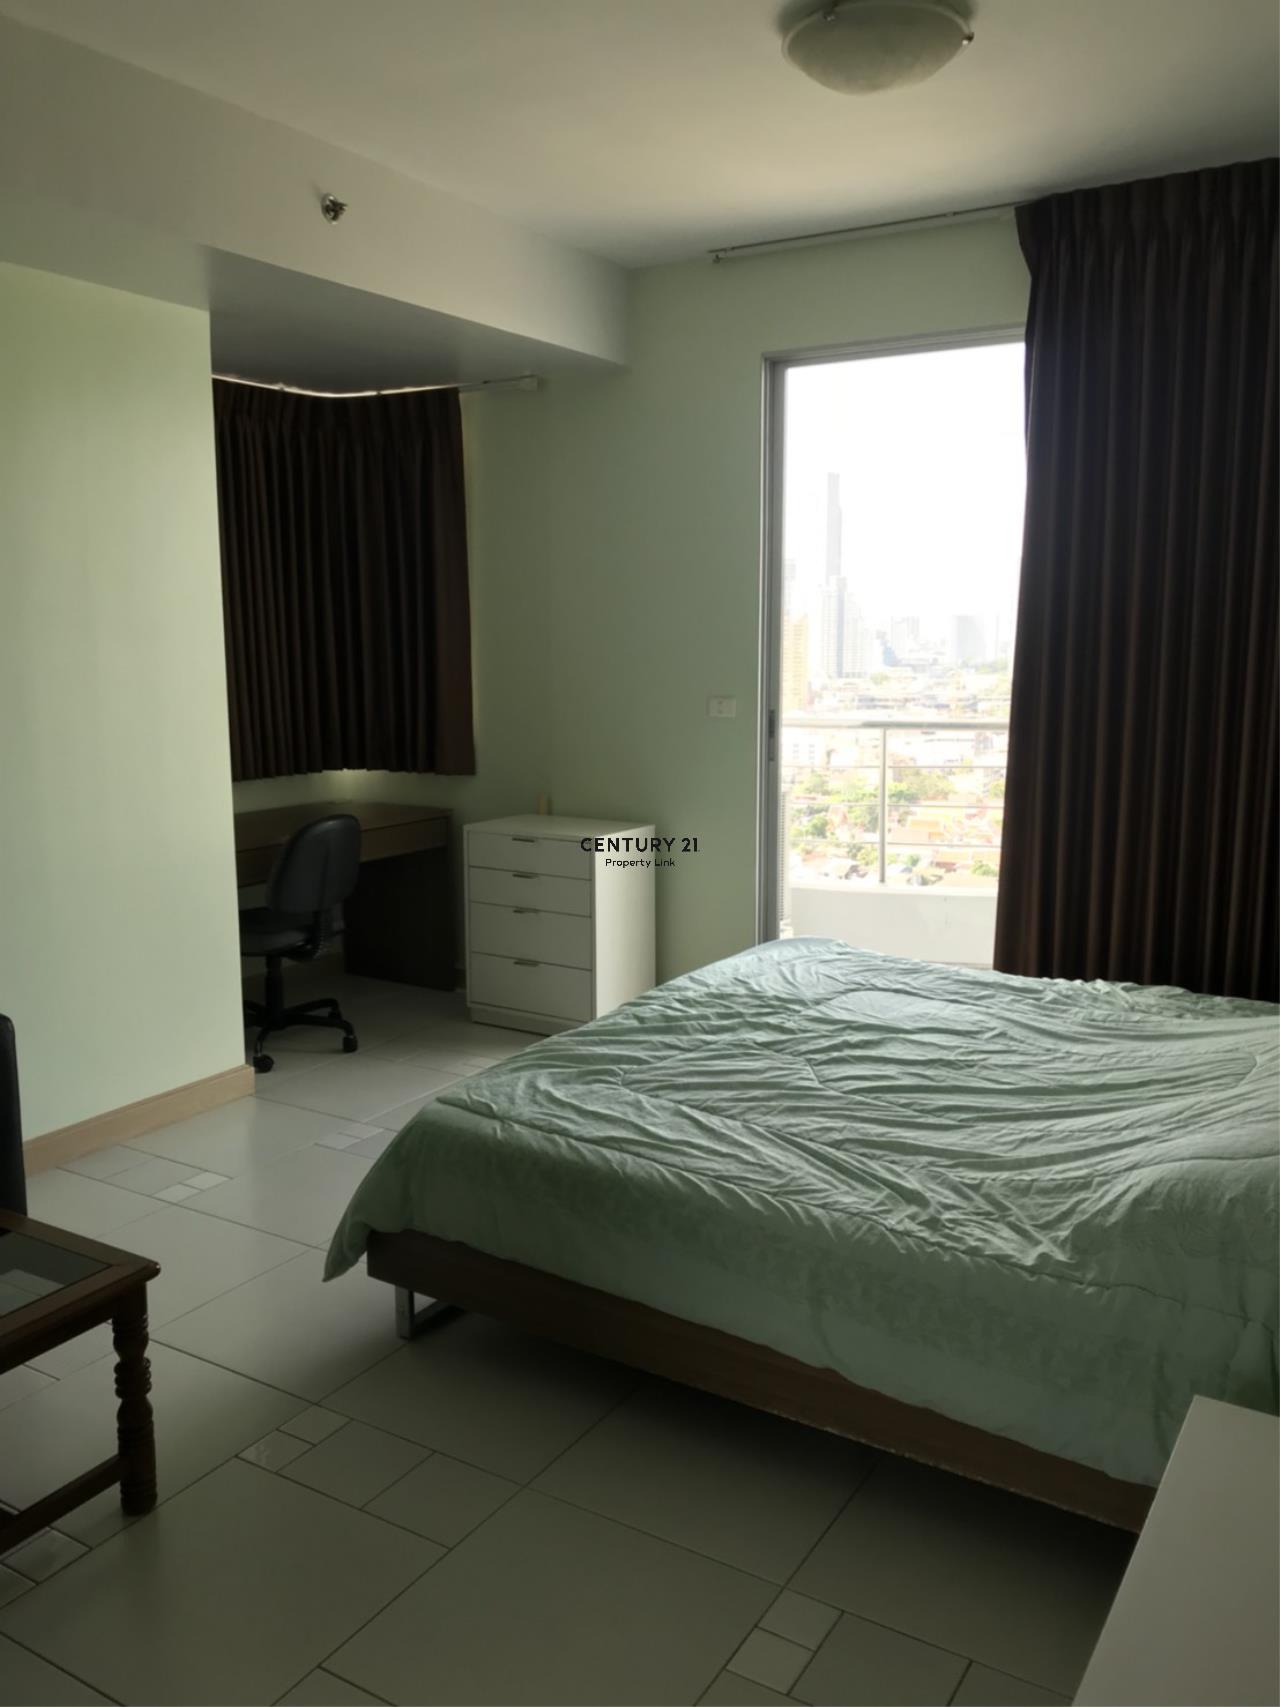 Century21 Property Link Agency's 38-CC-61548 Room for Rent Supalai River Place Condominium  Fully Furnished High level City view near BTS Krung Thon Buri I-con siam 2